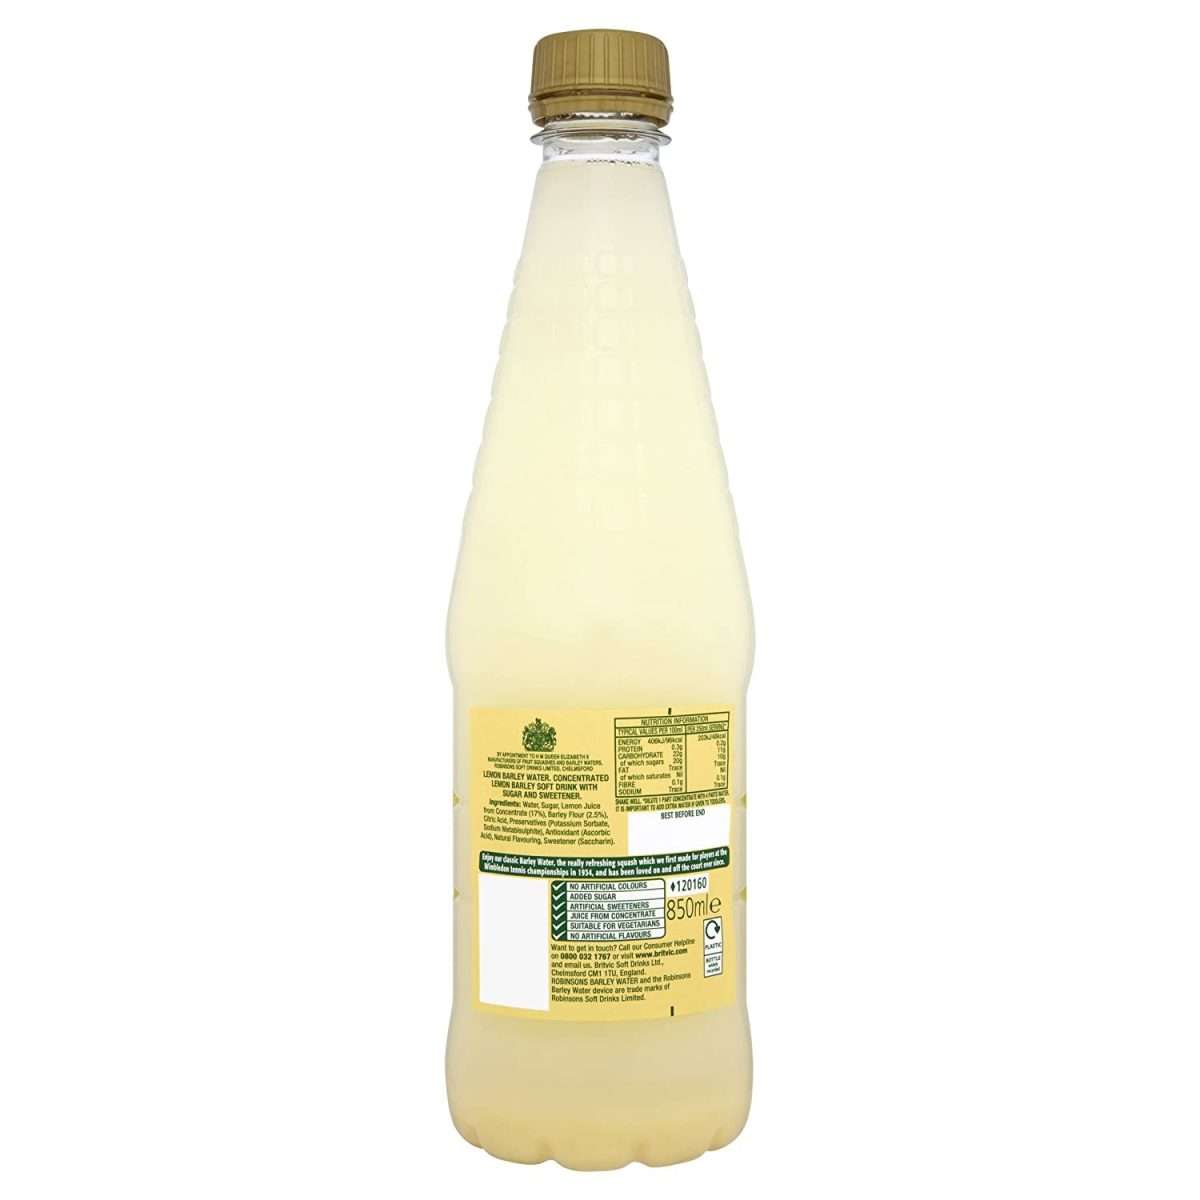 Perfect Interlude: Lemon Barley Water For Cystitis